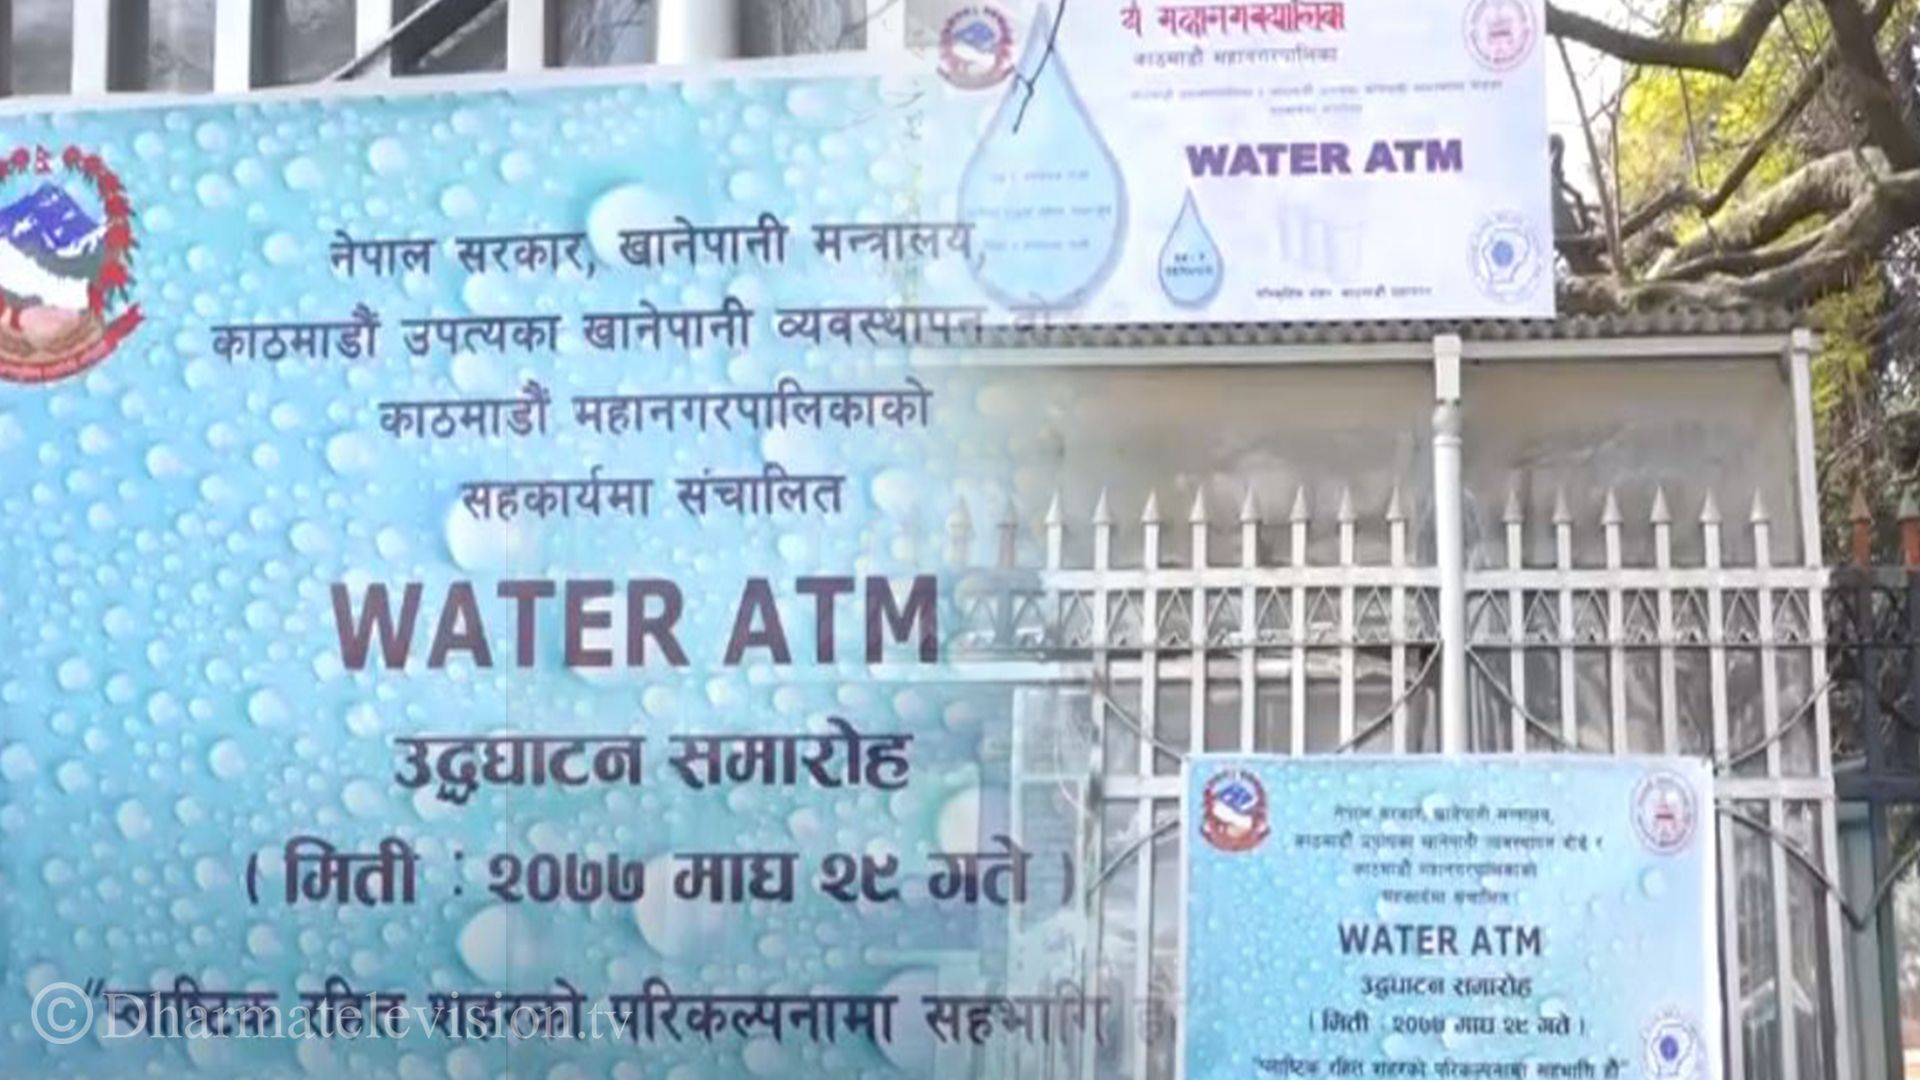 Rs 2 for a cup of water from water ATM in Kathmandu